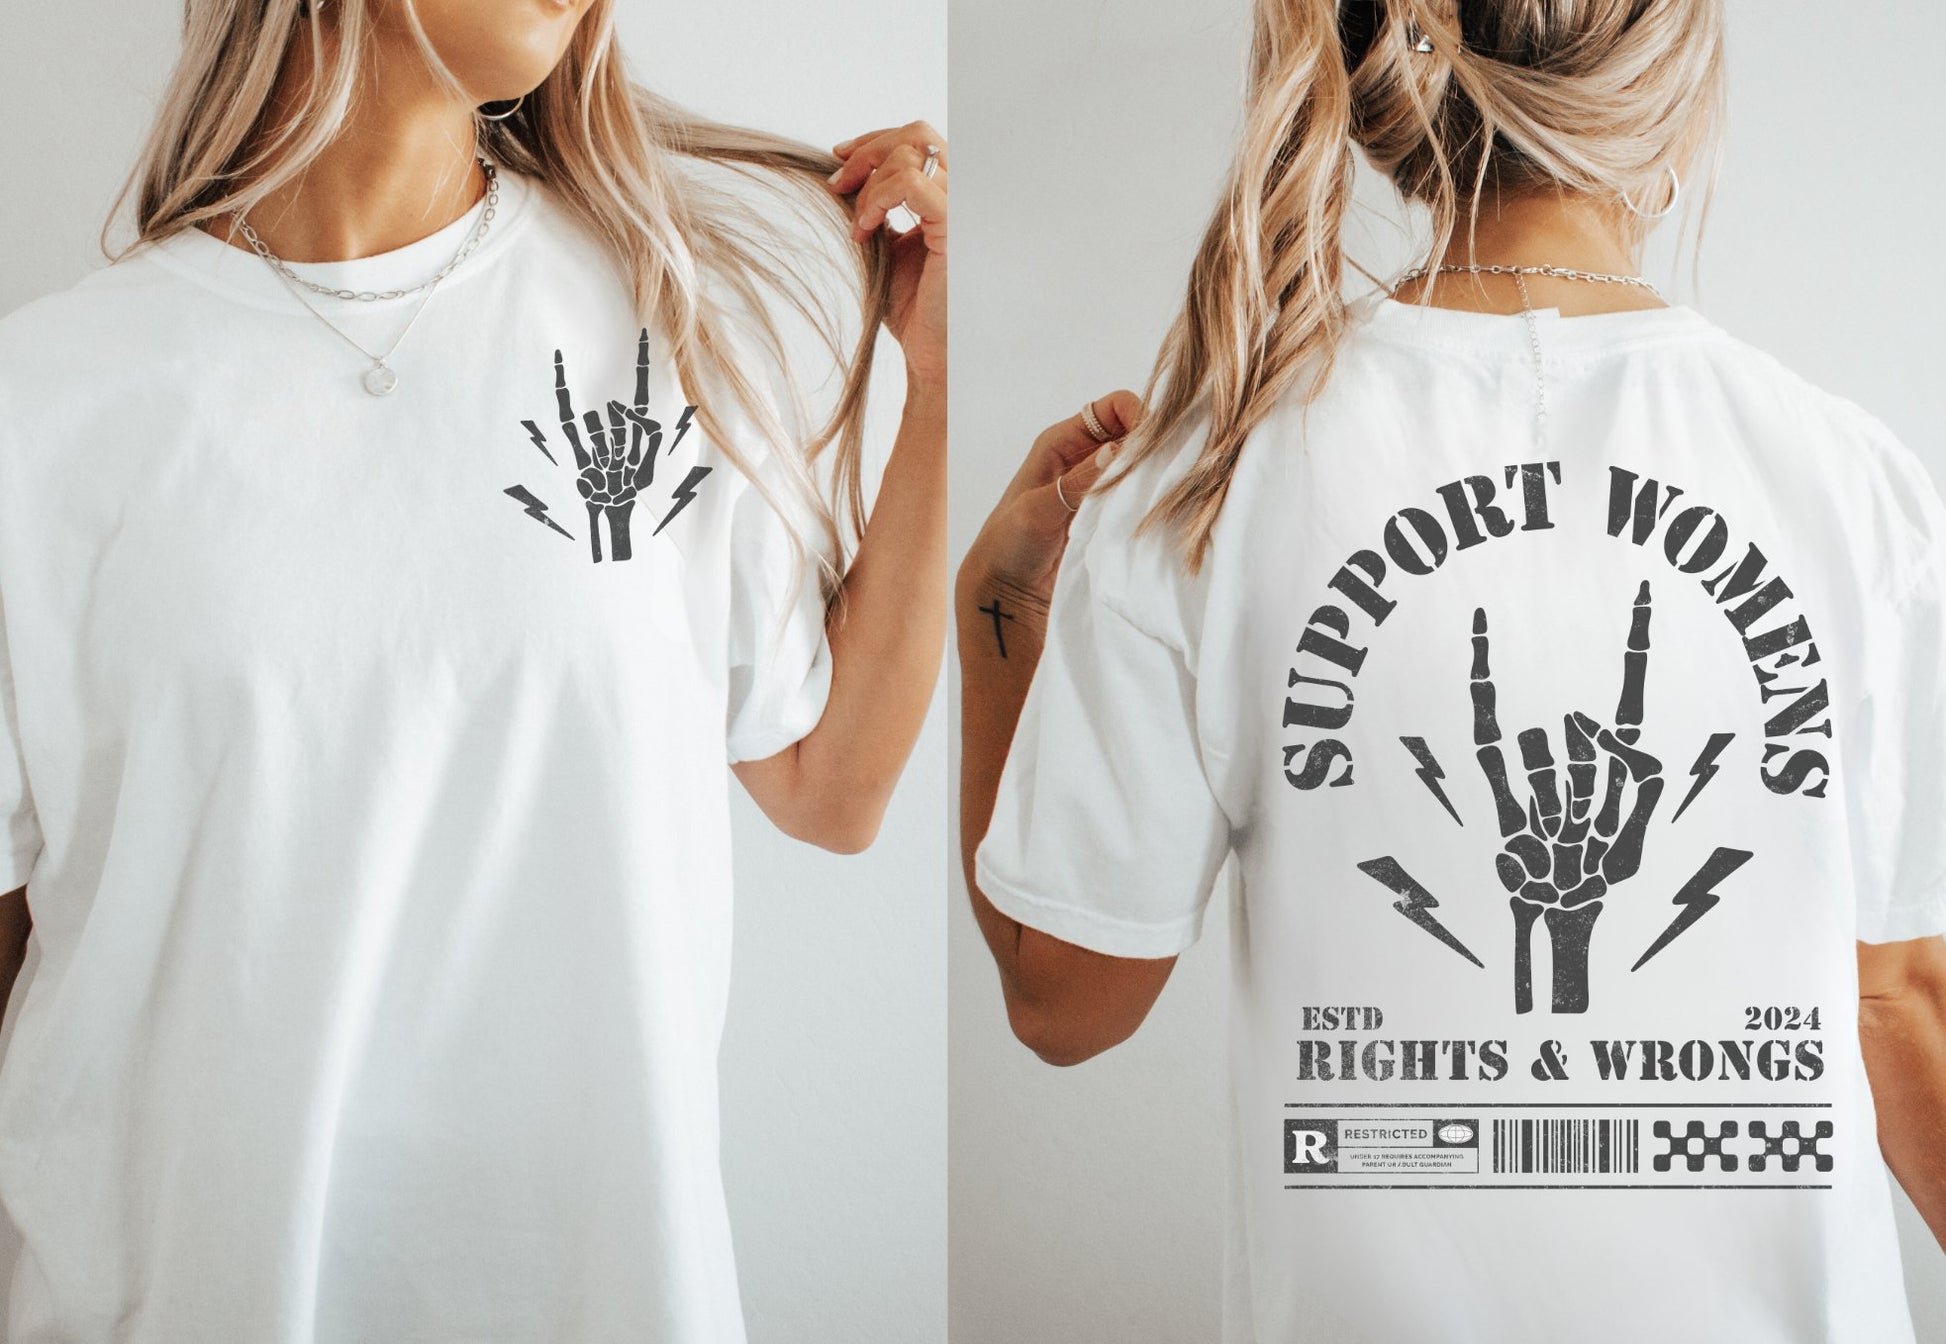 Support Womens Rights and Wrongs Tee - GingerTots - Comfort Colors Shirt - S - White -